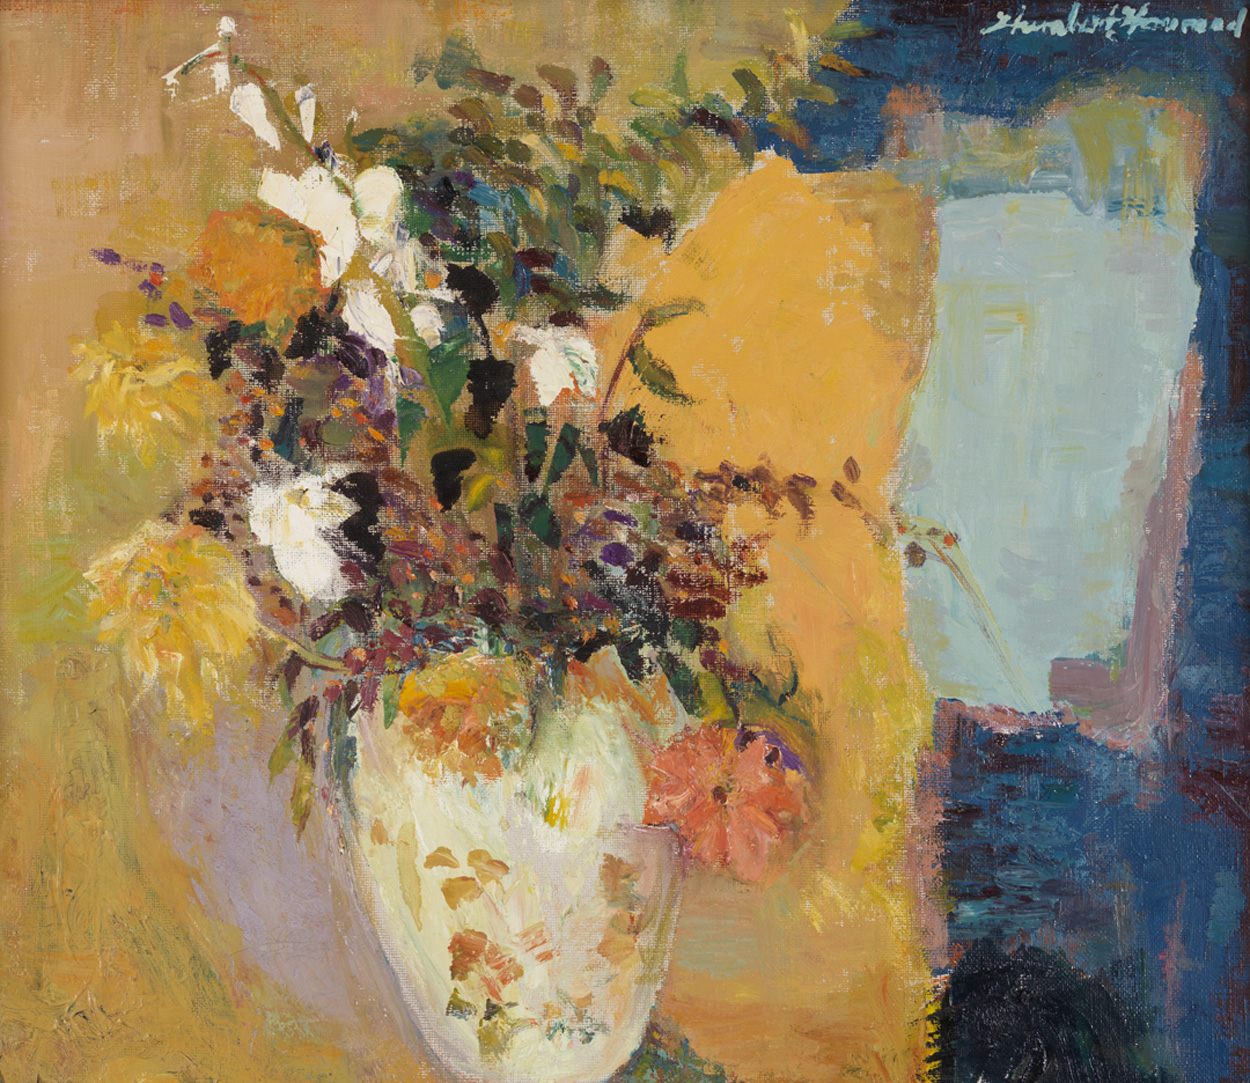 Untitled [Vase with flowers]